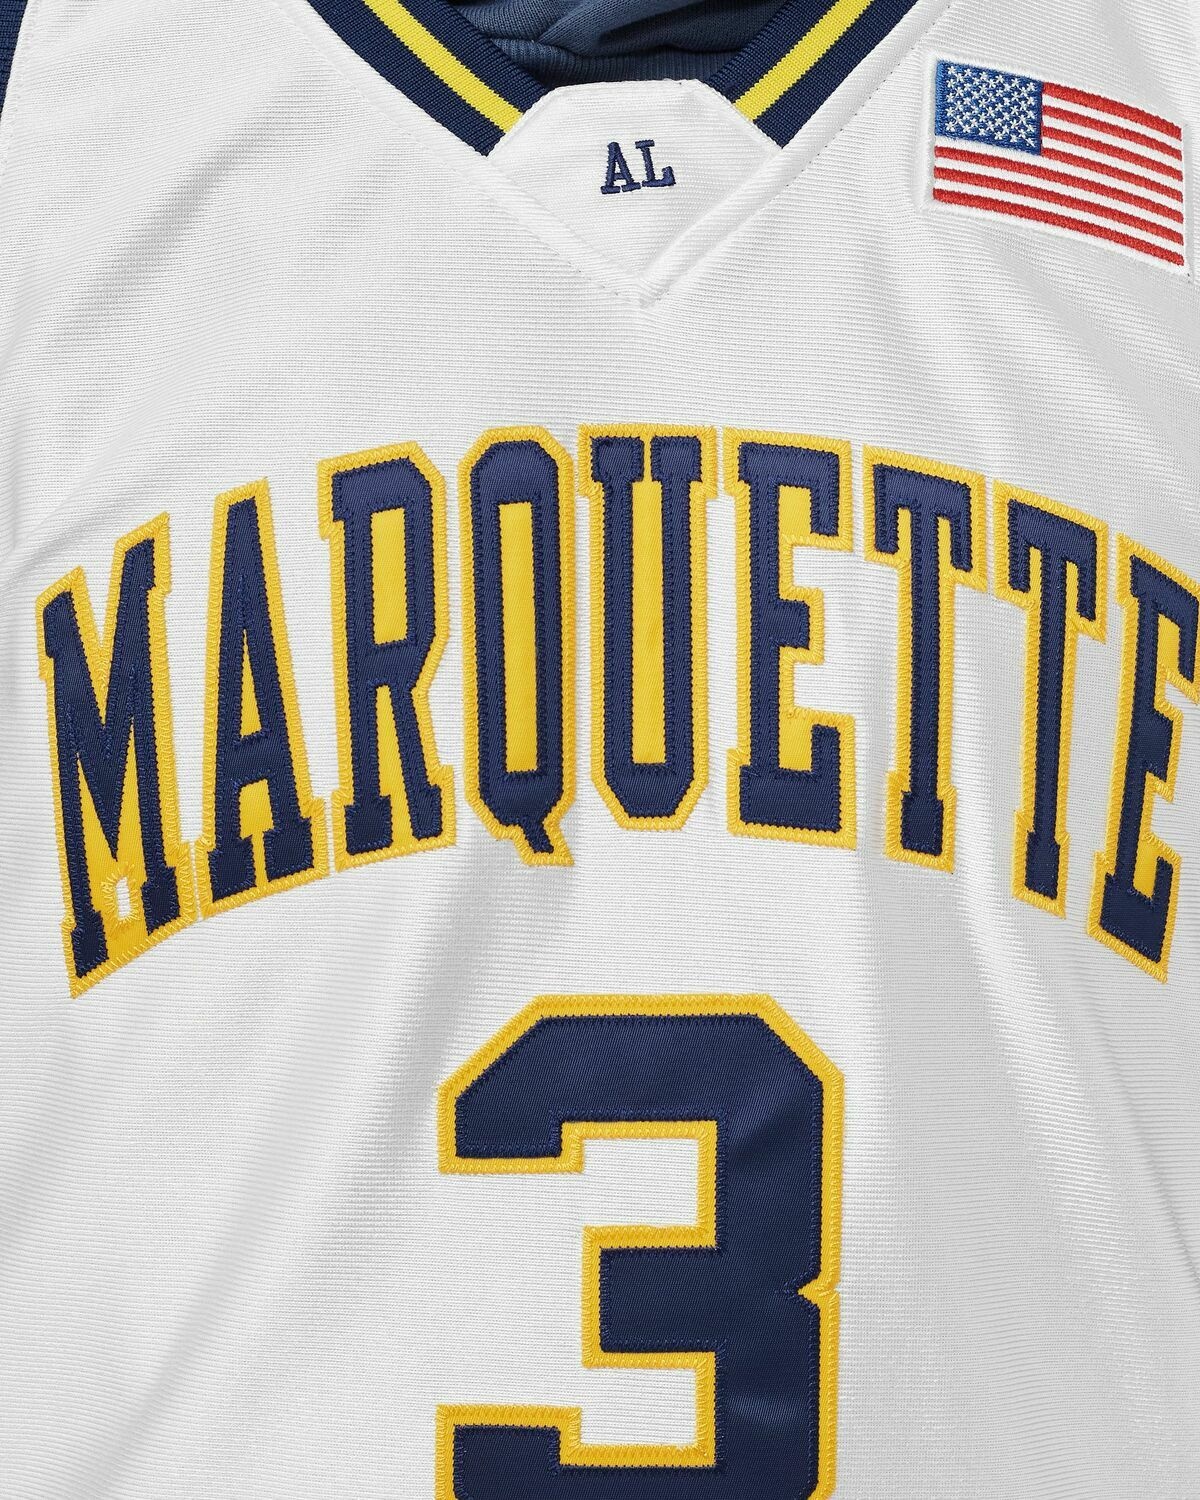 Mitchell & Ness Ncaa Authentic Jersey University Marquette 2002 03 Dwyane Wade #3 White - Mens - Jerseys